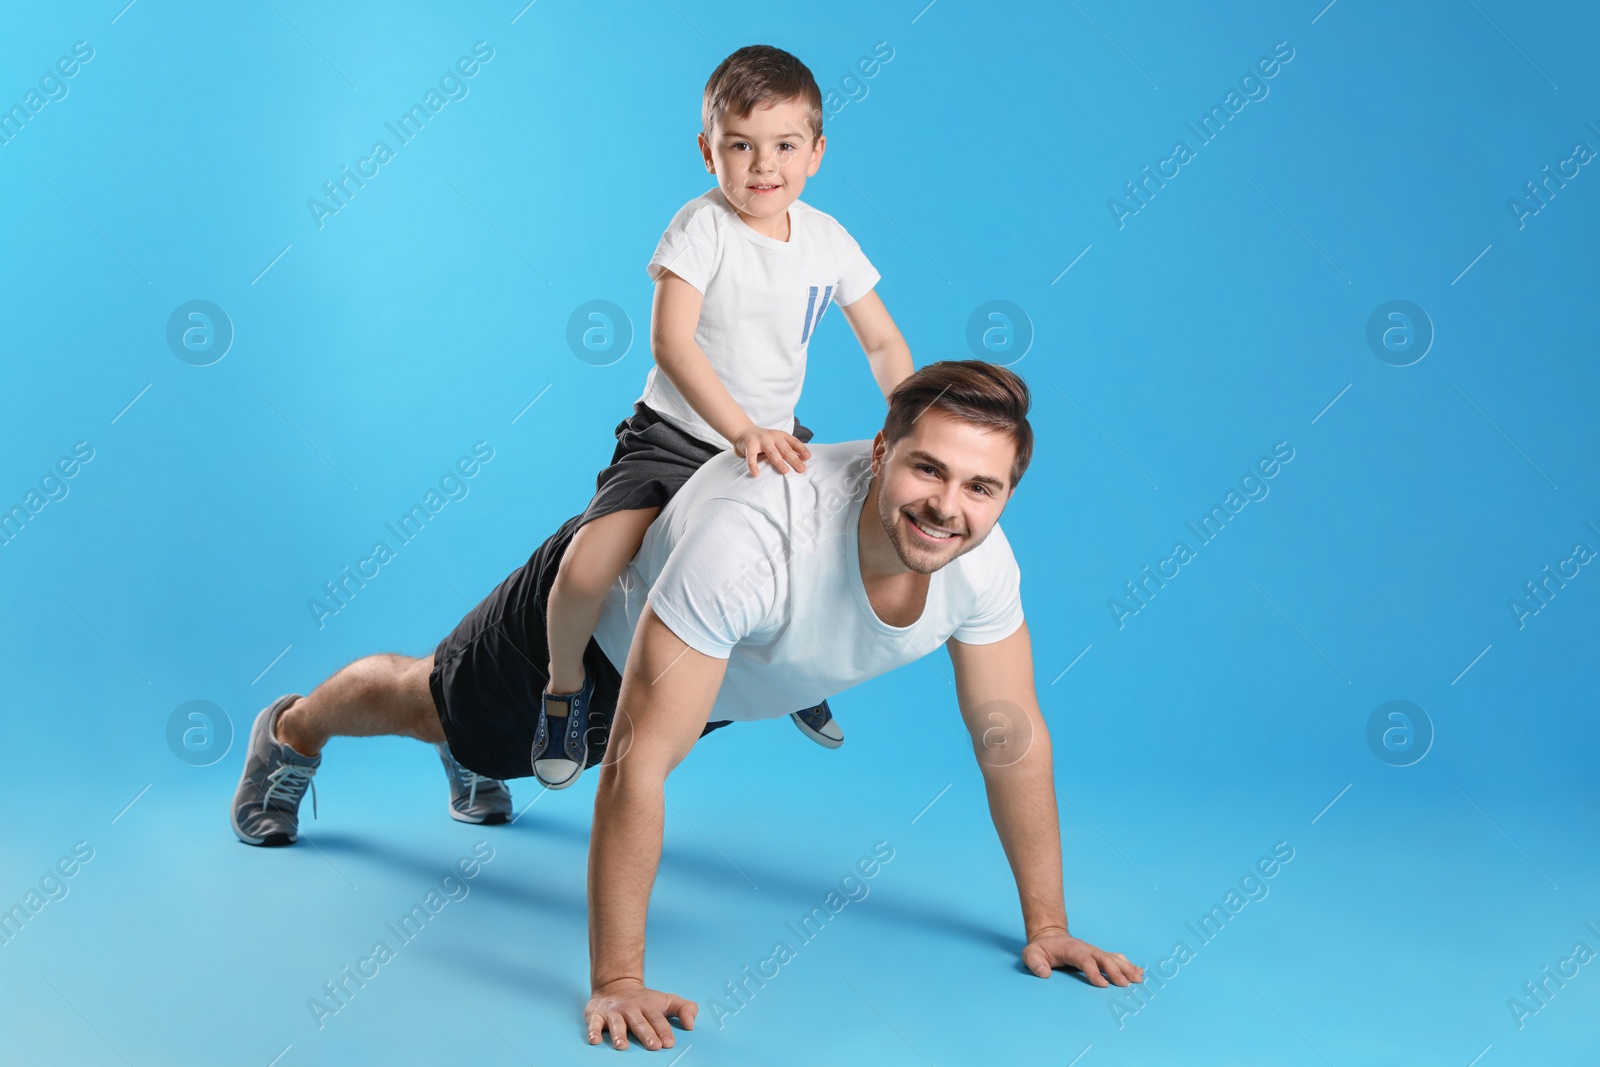 Photo of Dad doing push-ups with son on his back against color background